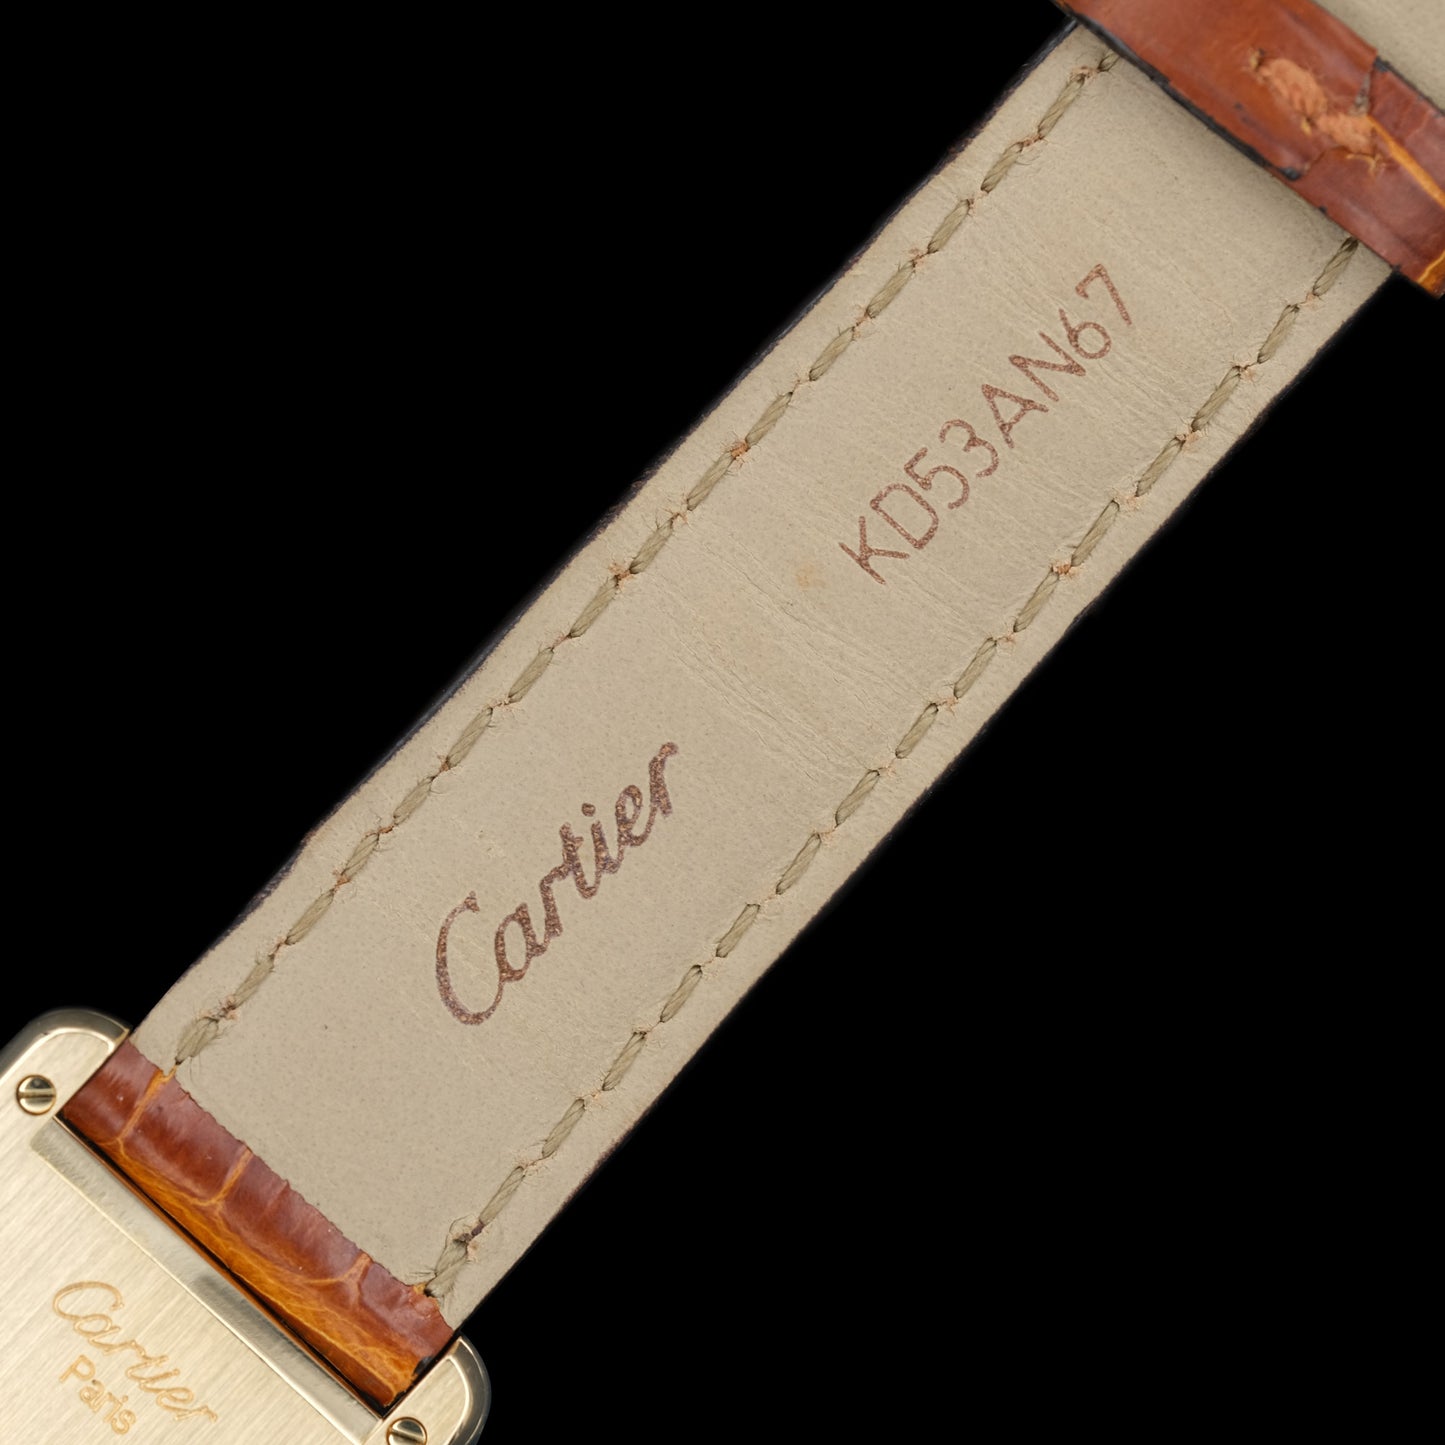 Cartier Tank Louis ref.66001 Quartz "Small" from the 1990s